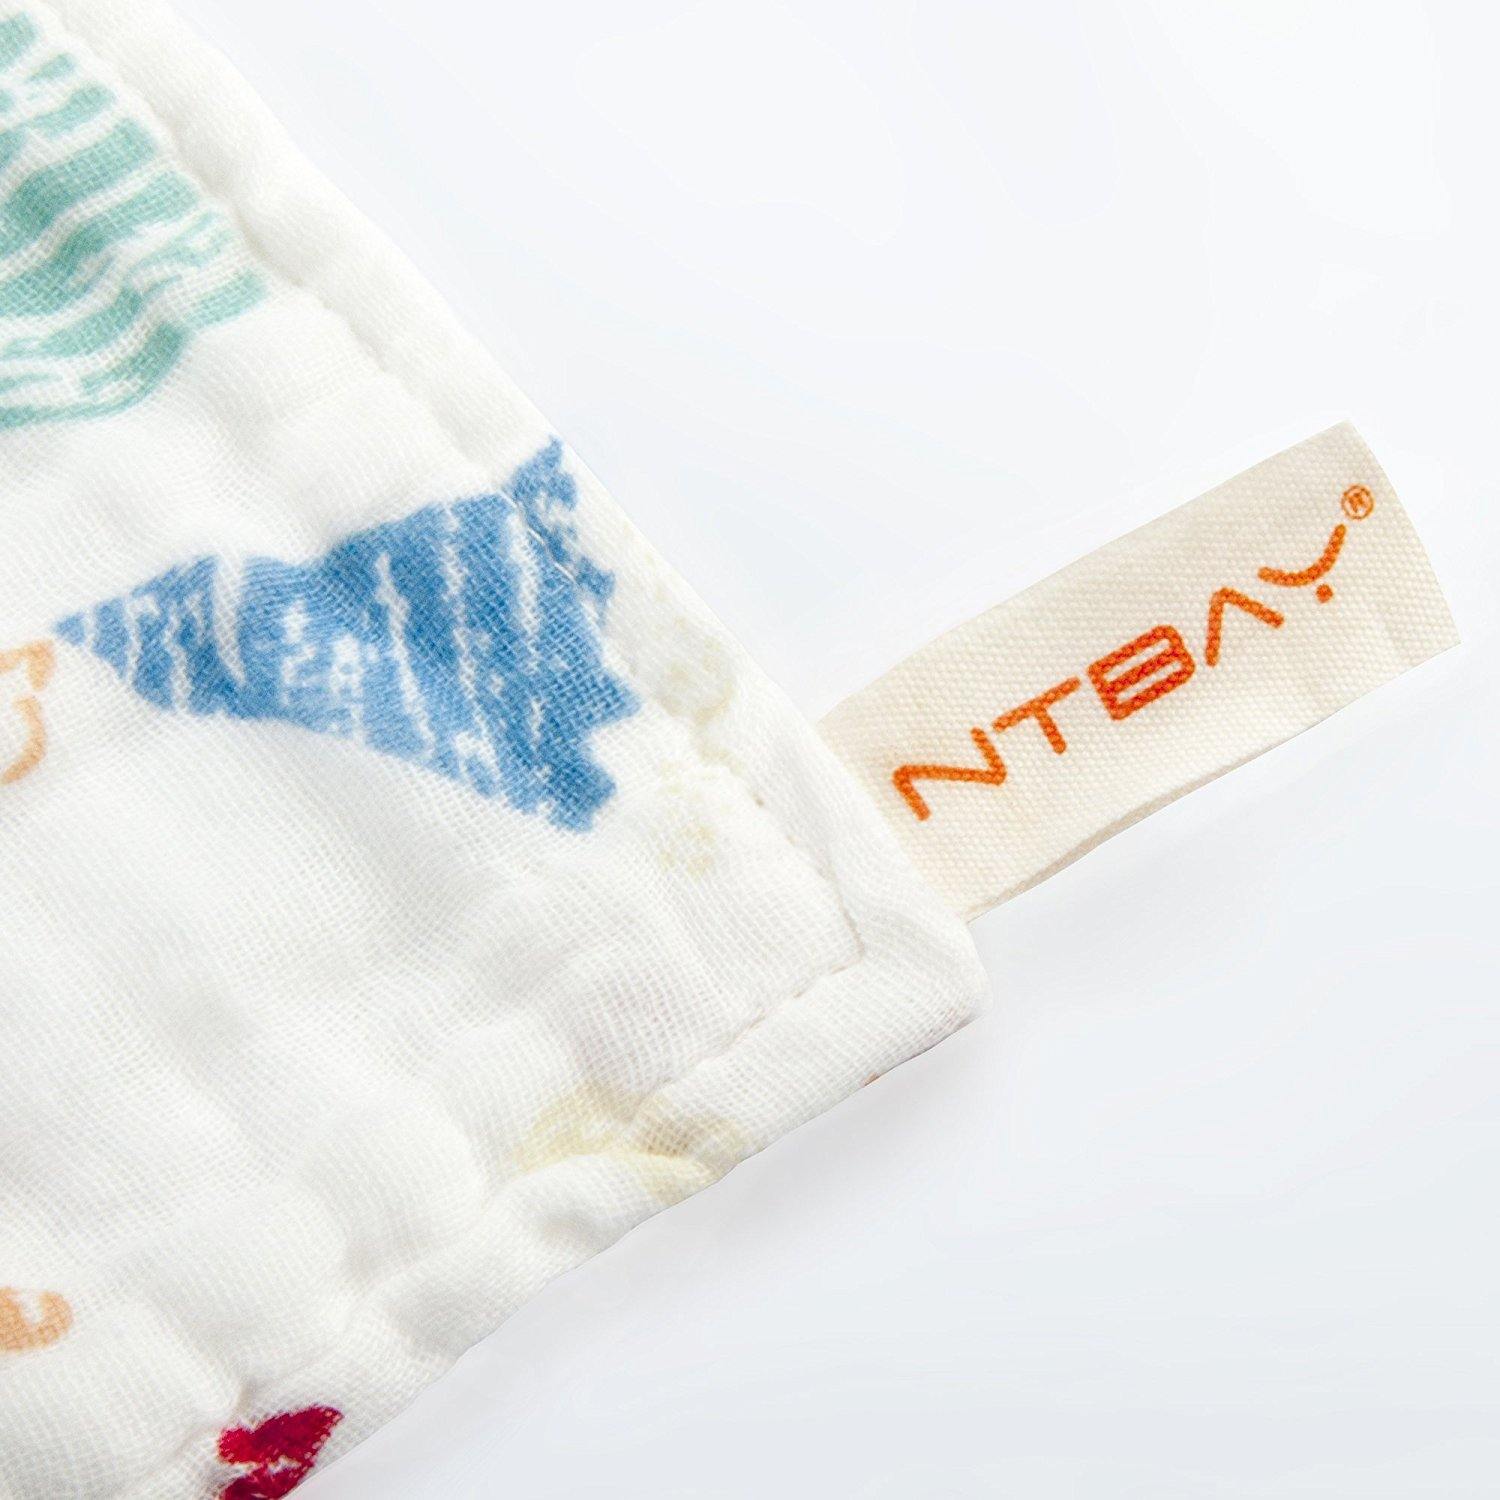 NTBAY 6 Pack Baby Muslin Washcloths, 6 Layers Natural Cotton Newborn Baby  Face Towel with Animals Printed Design, Soft and Breathable Reusable Wipes